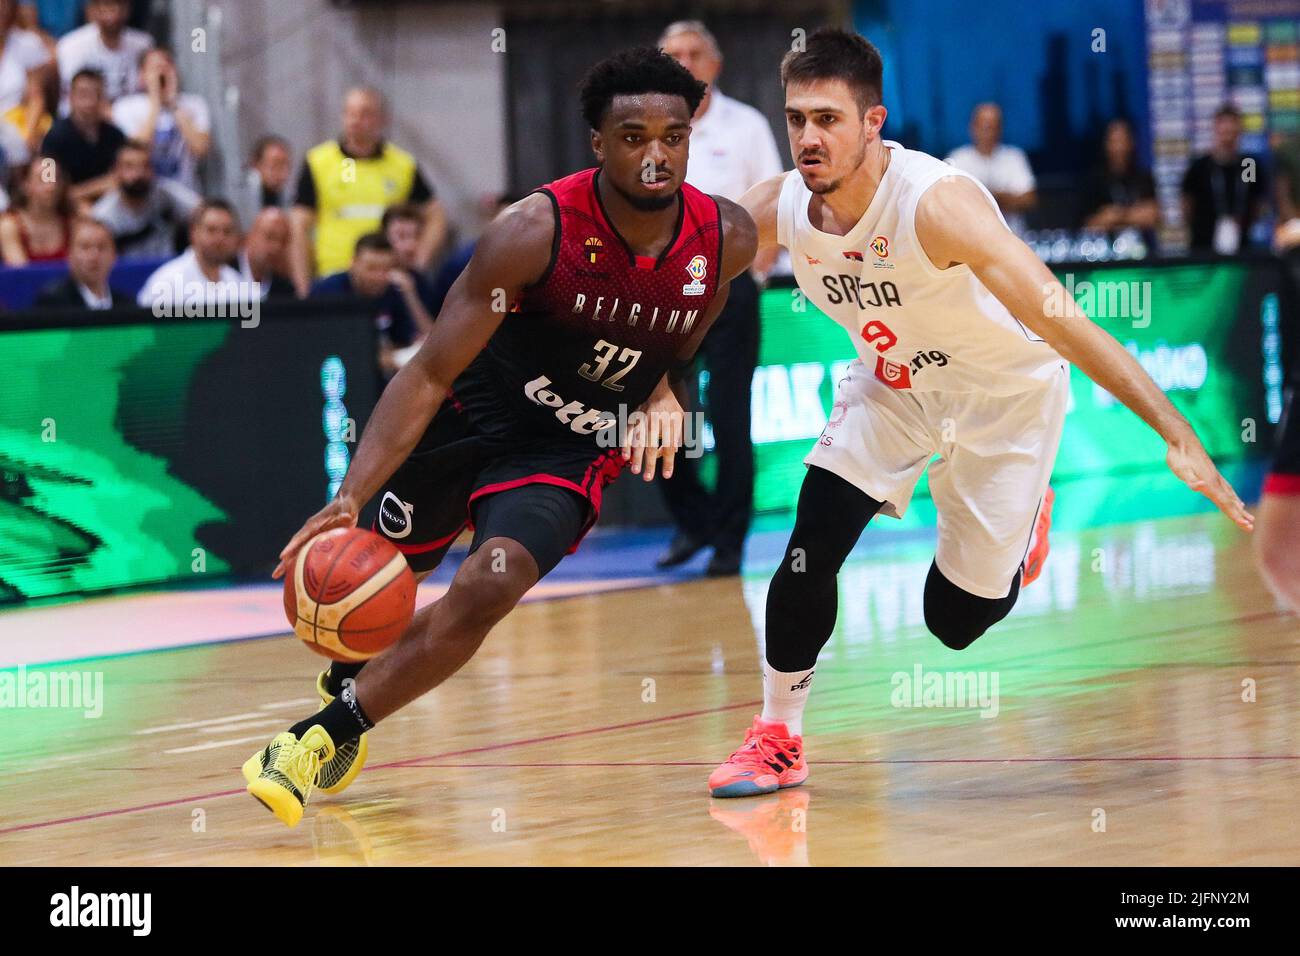 Nis, Serbia, 04/07/2022, Belgium's Retin Obasohan and Serbia's Vanja  Marinkovic fight for the ball during a basketball match between Serbia and  Belgium's national team the Red Lions, Monday 04 July 2022 in